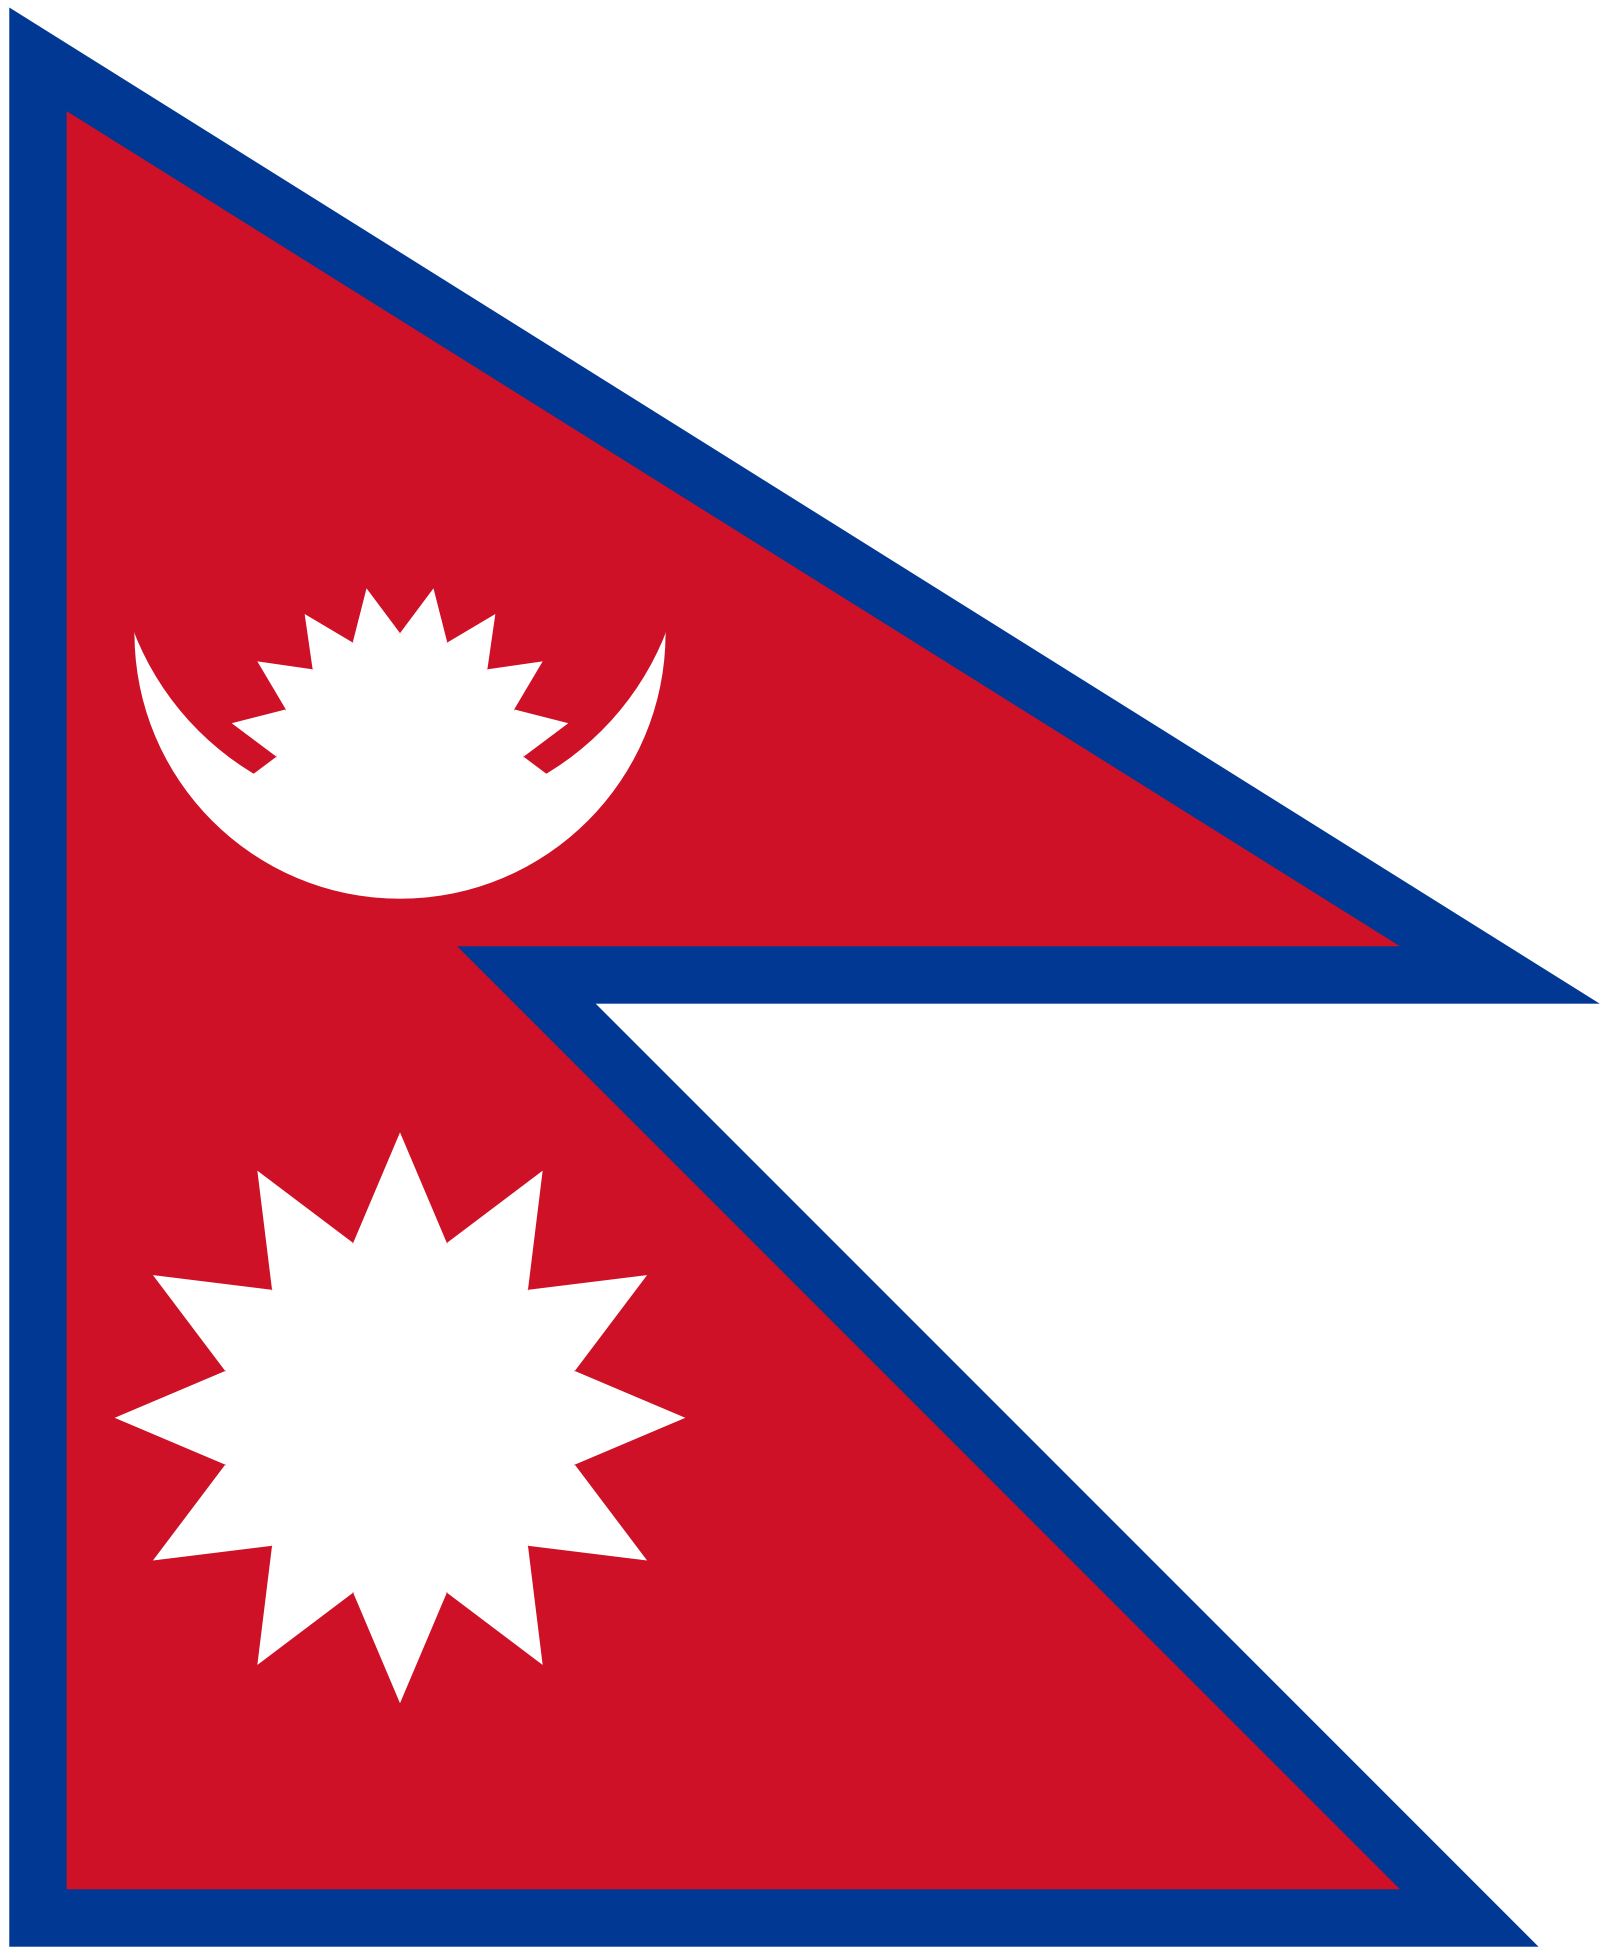 2 Red Triangles Logo - Nepal. Flags of countries